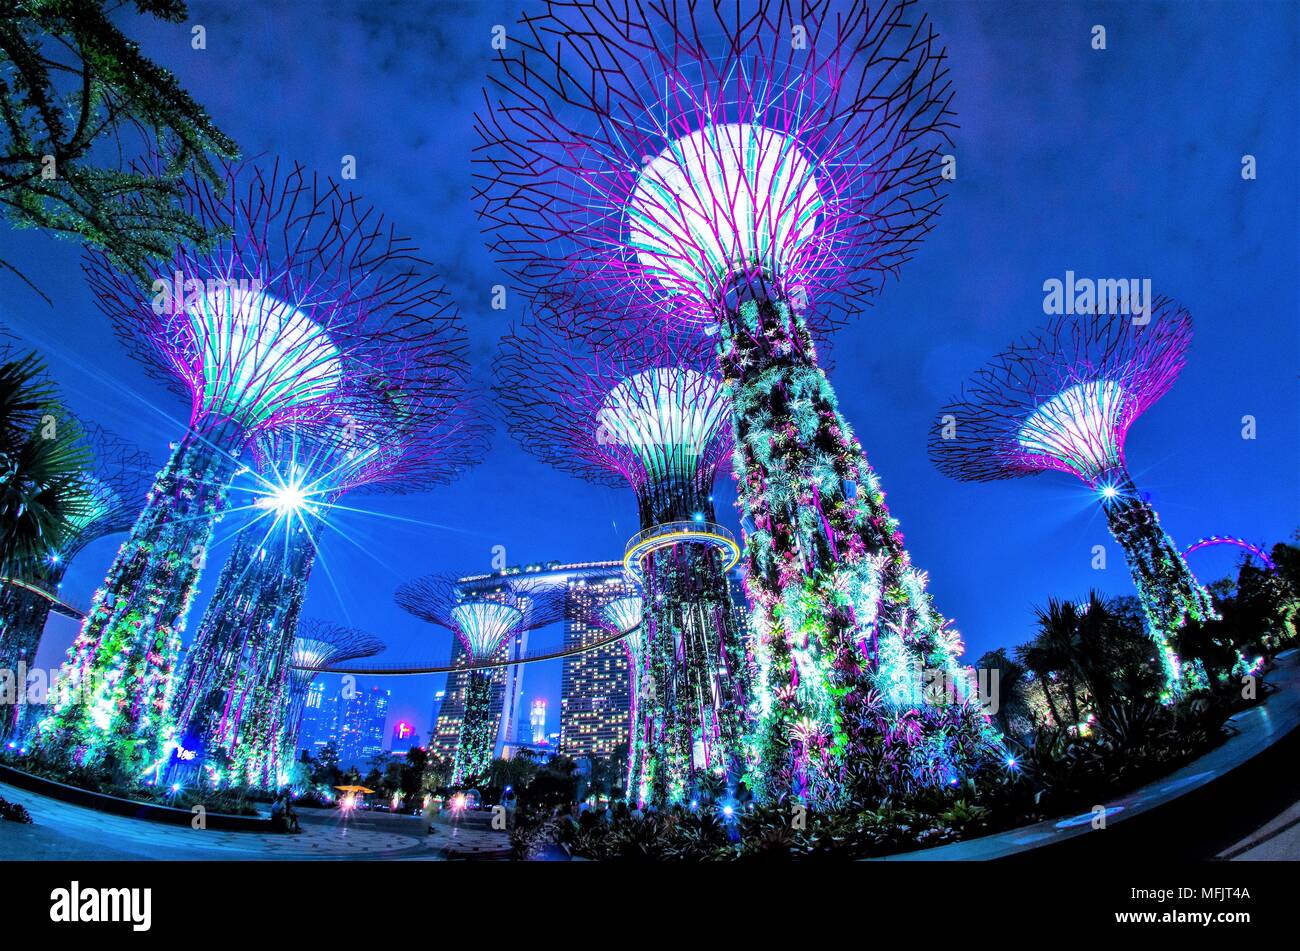 Supertrees at Gardens by the Bay. The tree-like structures are fitted with environmental technologies that mimic the ecological function of trees. Stock Photo